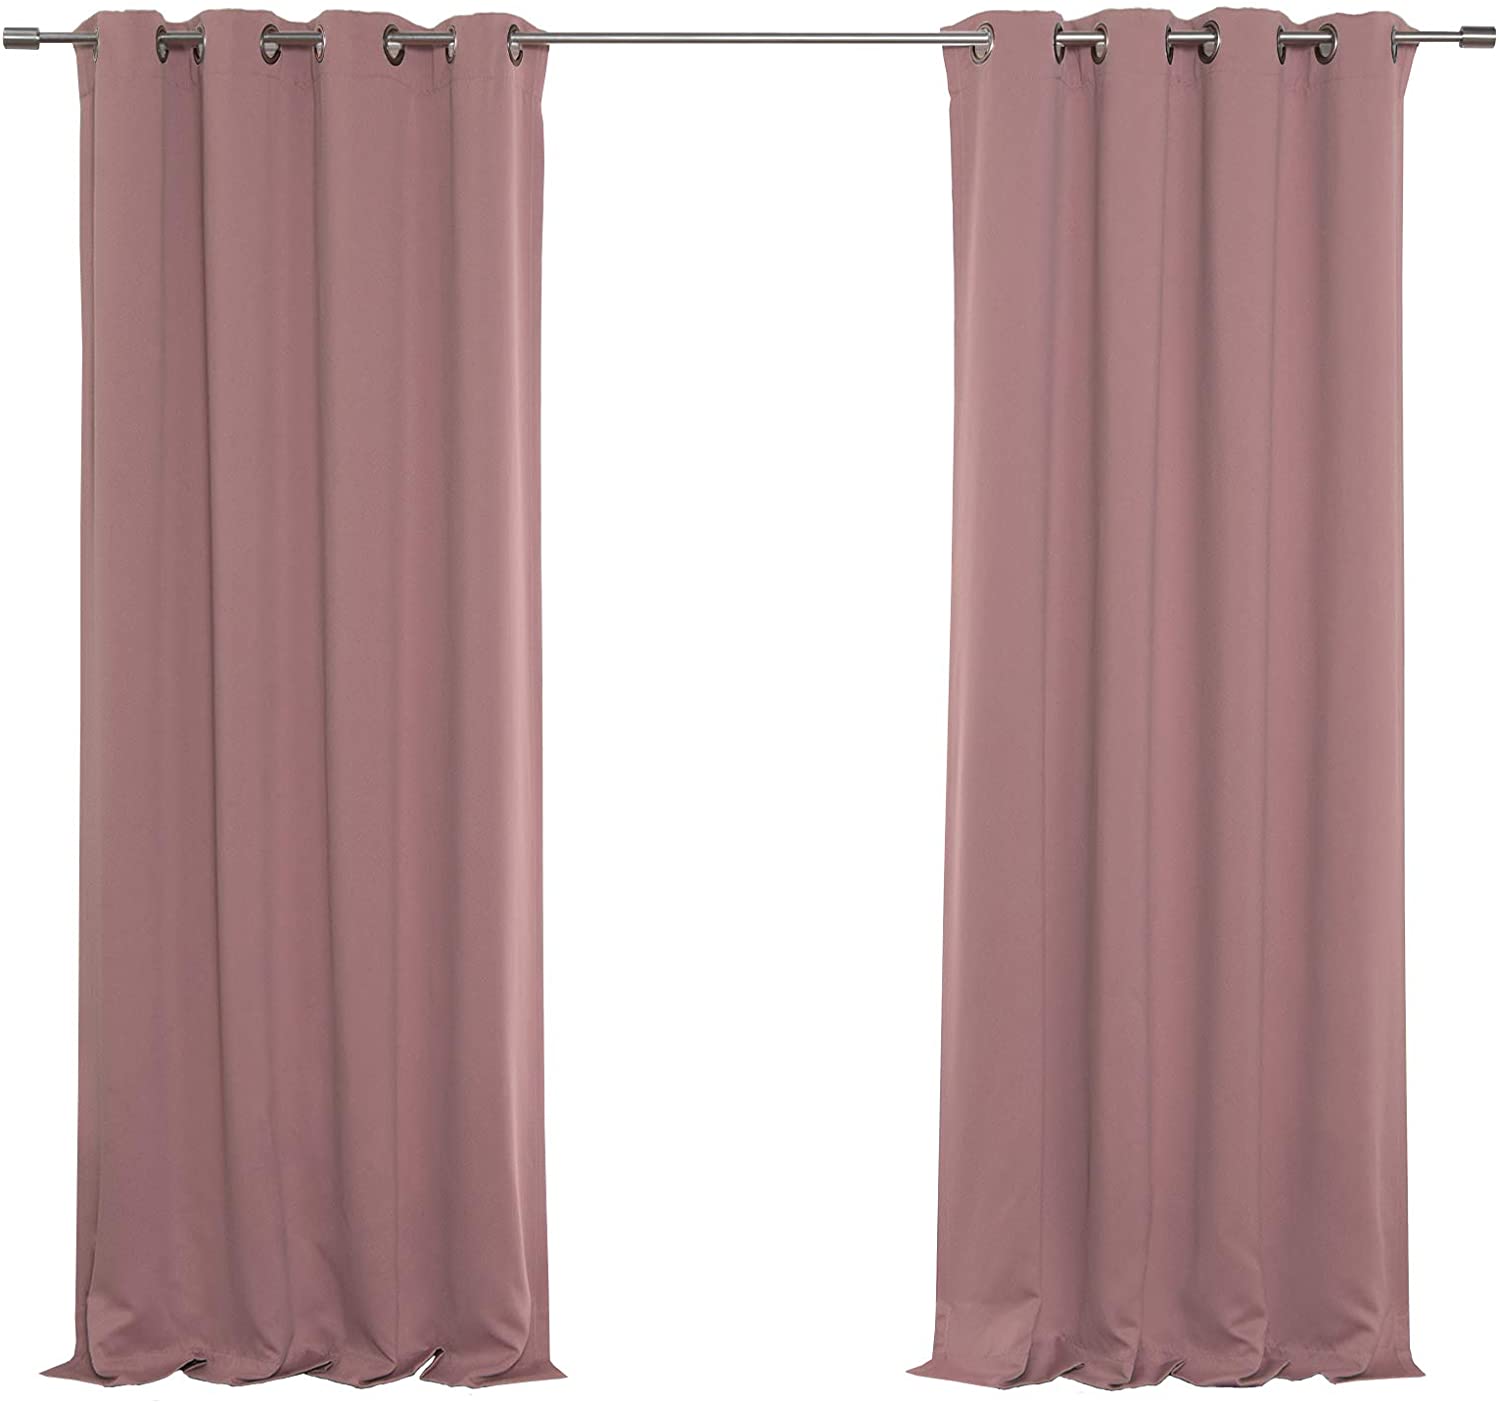 Best Home Fashion Grommet Top Thermal Blackout Curtains